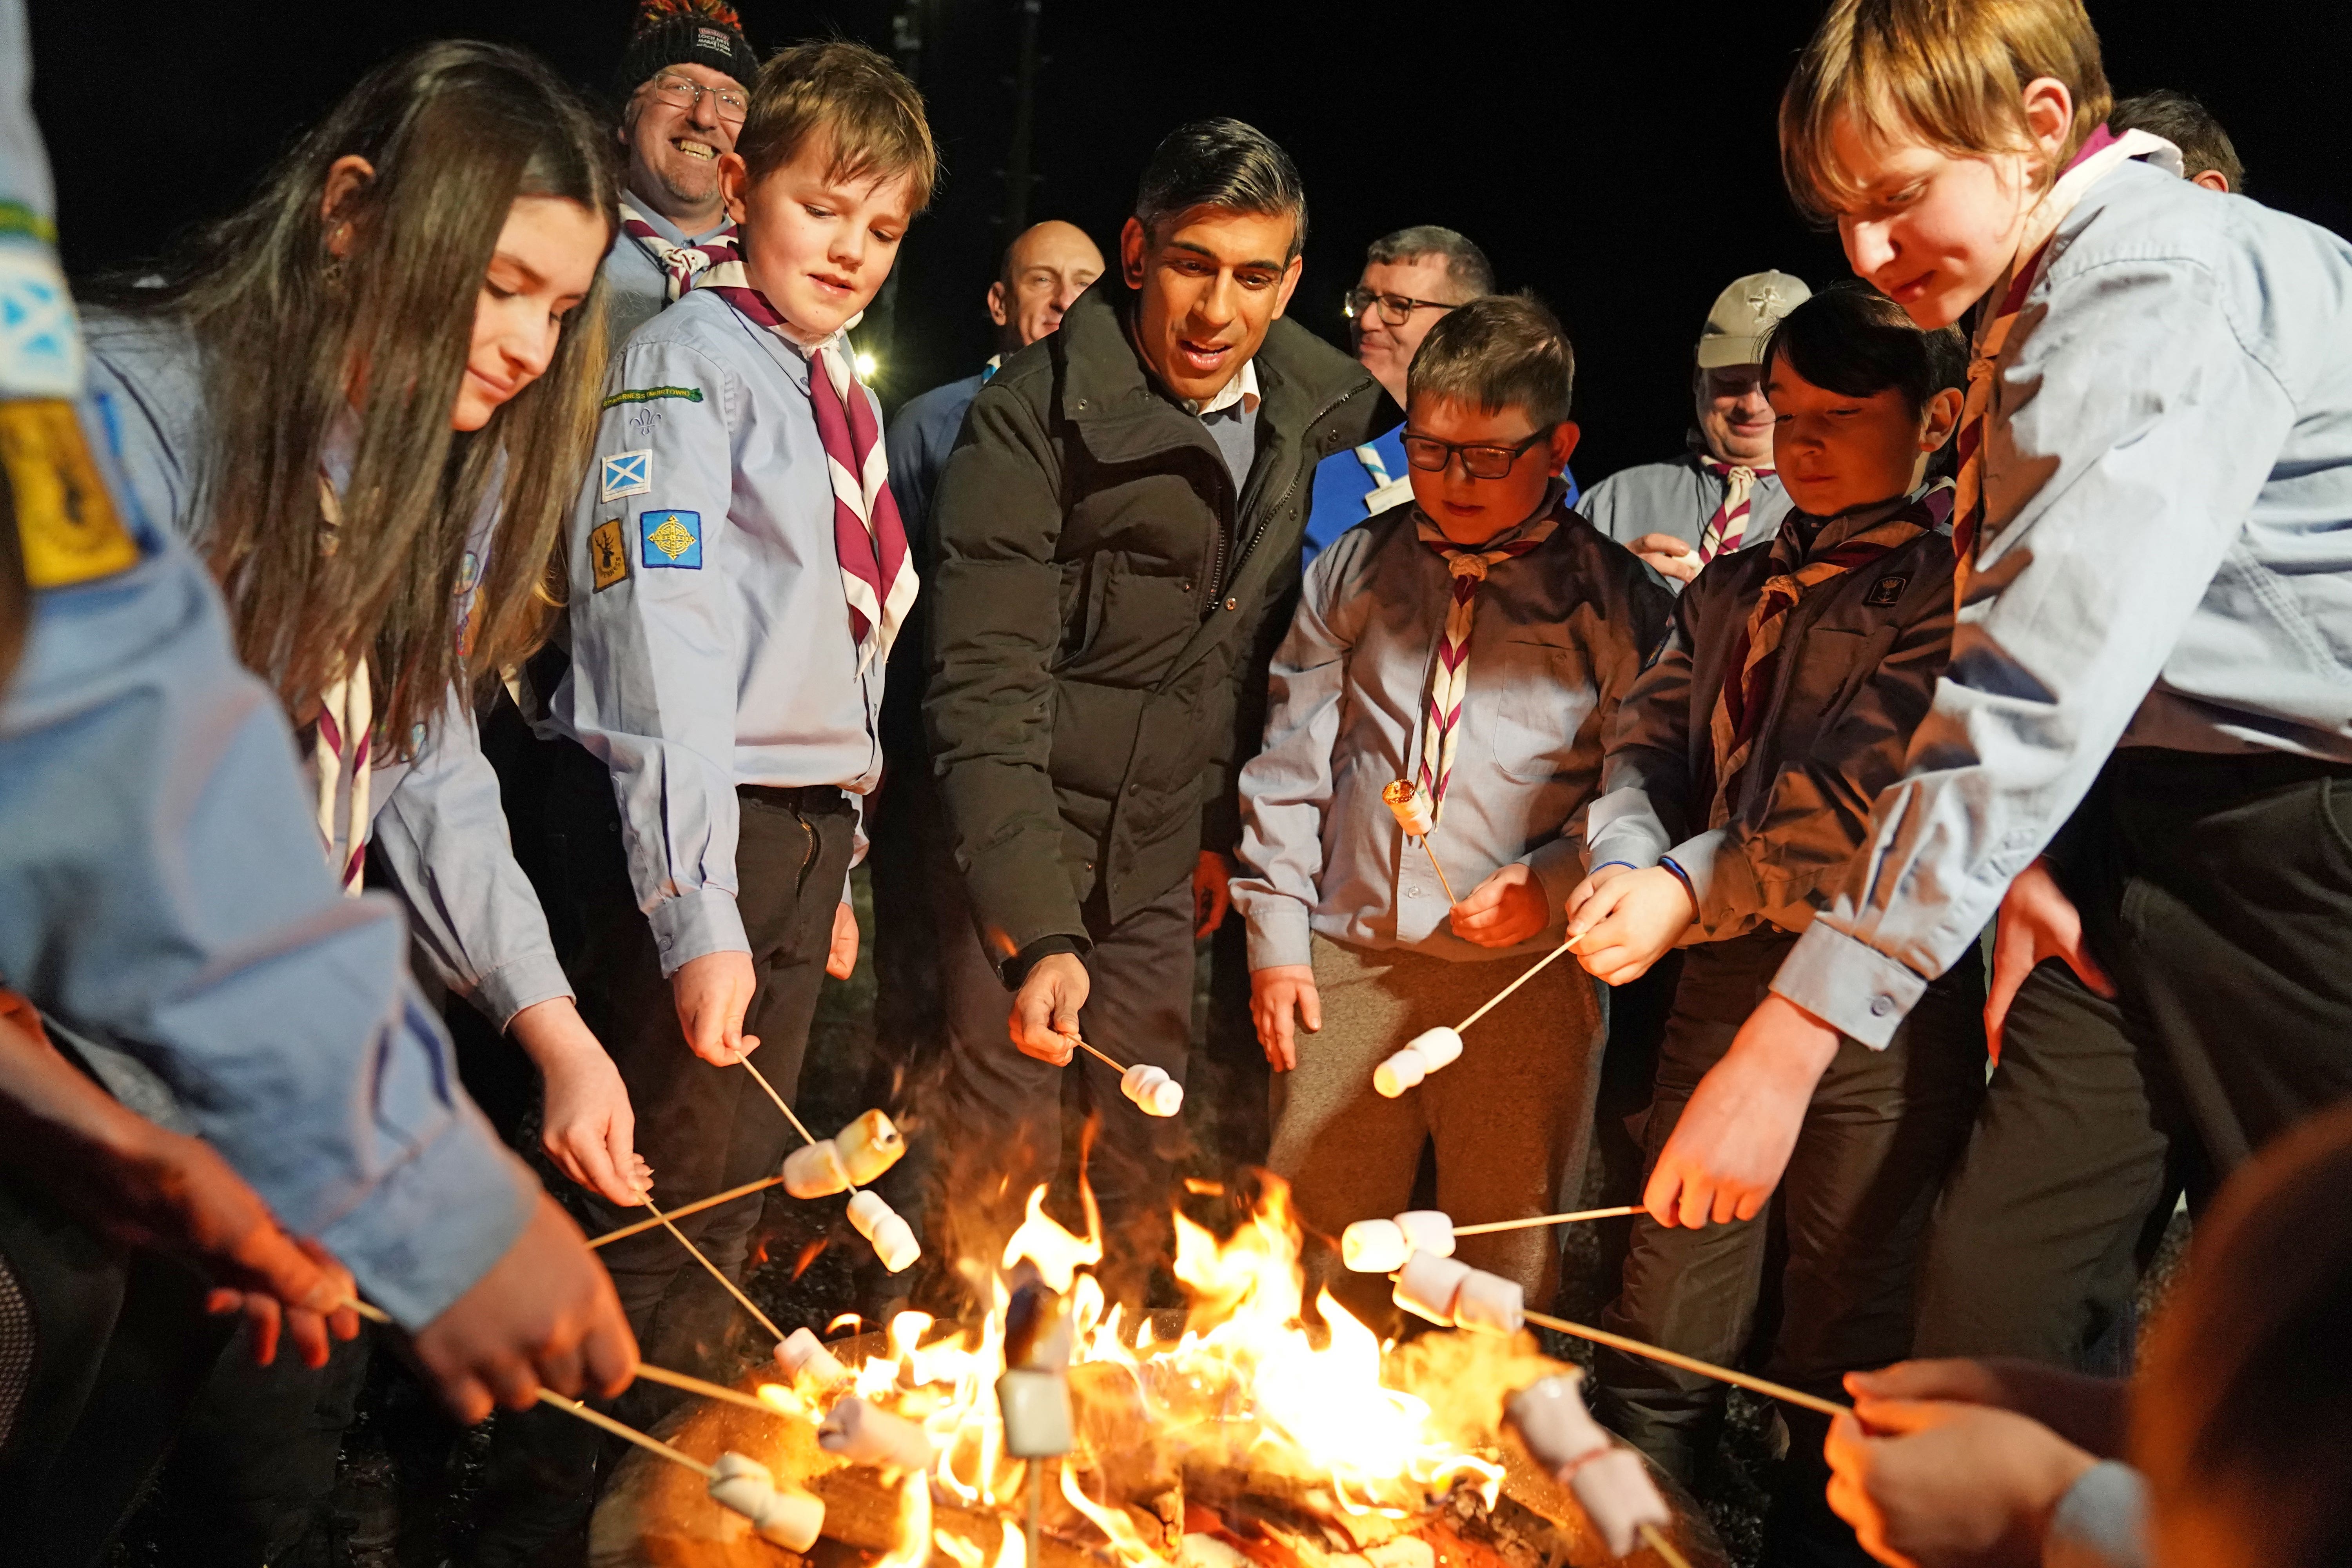 Rishi Sunak toasts marshmallows with a group of Sea scouts in Muirtown, Inverness, as part of his trip to Scotland (Andrew Milligan/PA)